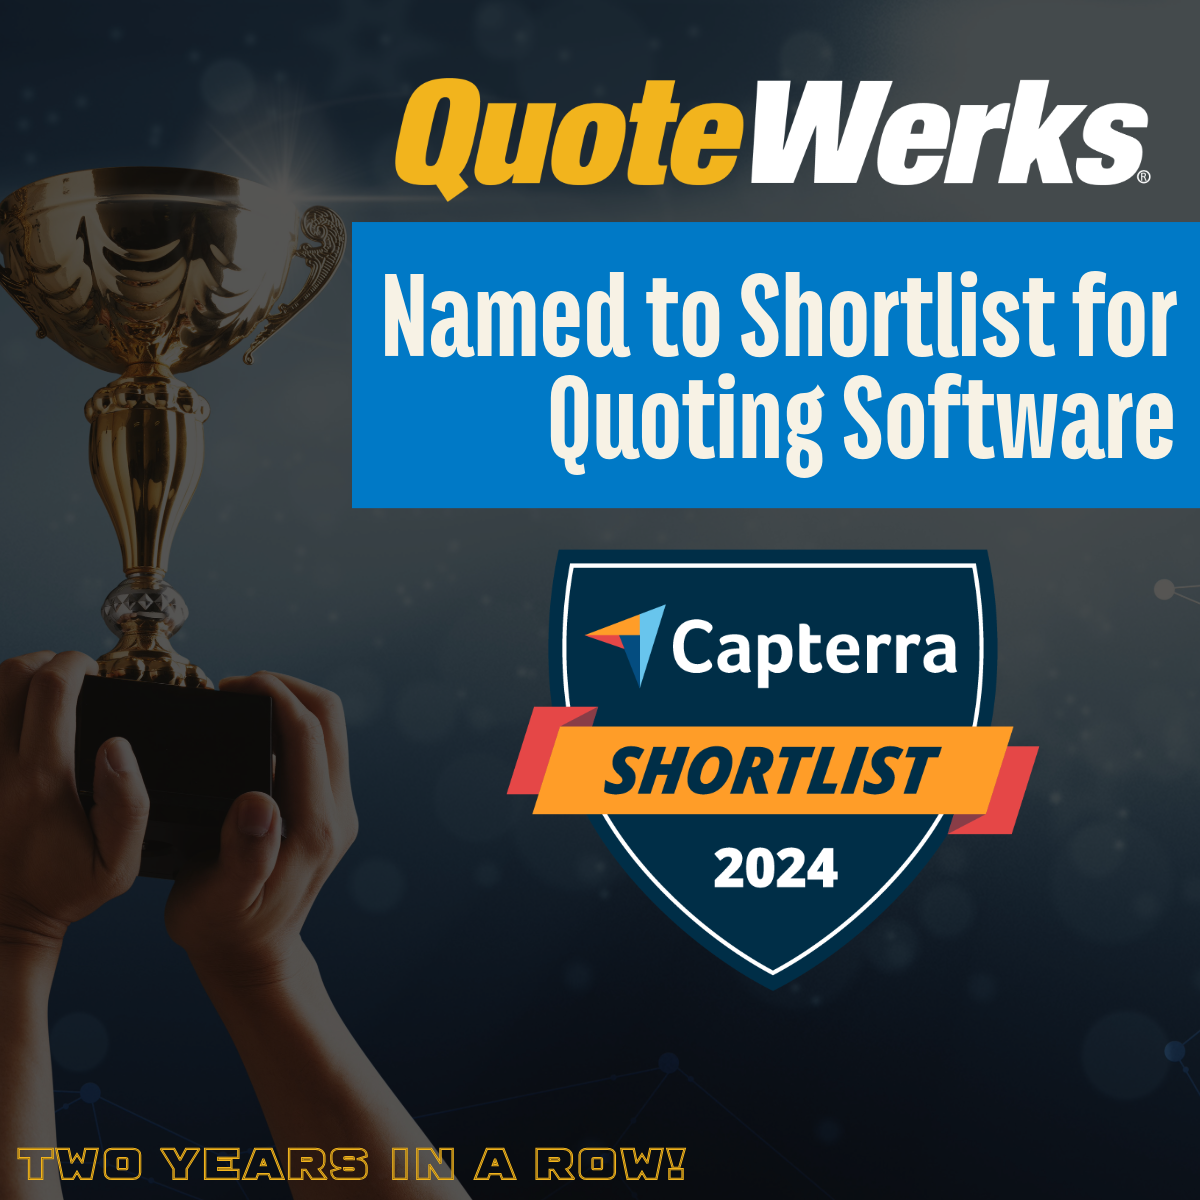 We're thrilled to announce that QuoteWerks has been named to the Capterra Shortlist for Quoting Software in 2024! This prestigious recognition highlights our commitment to providing businesses with the best possible tools for creating winning quotes and proposals.